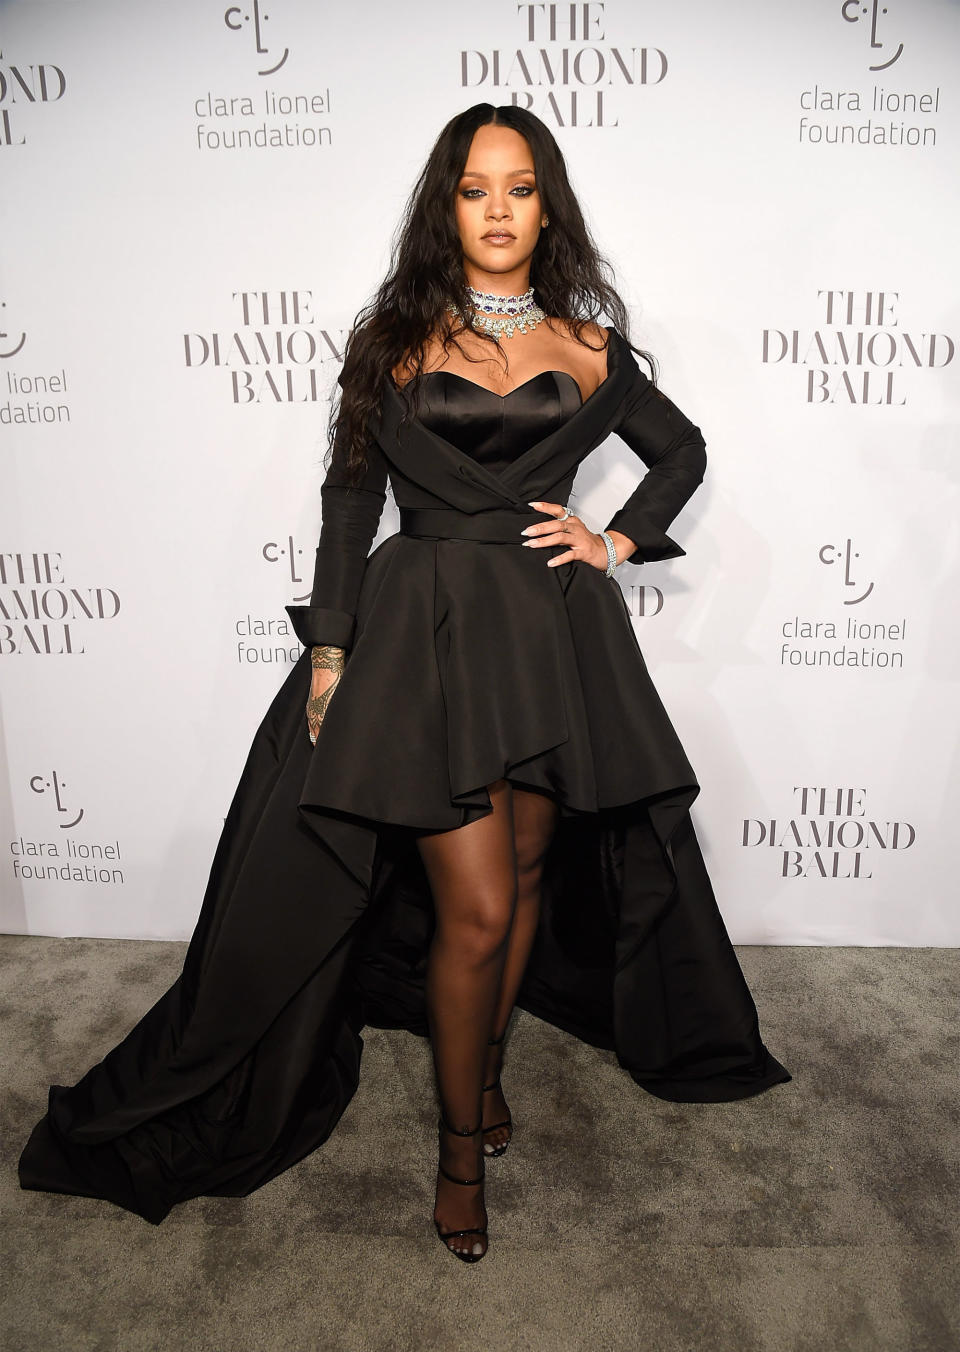 Rihanna Stuns in Dramatic Black Gown at Her 3rd Annual Diamond Ball